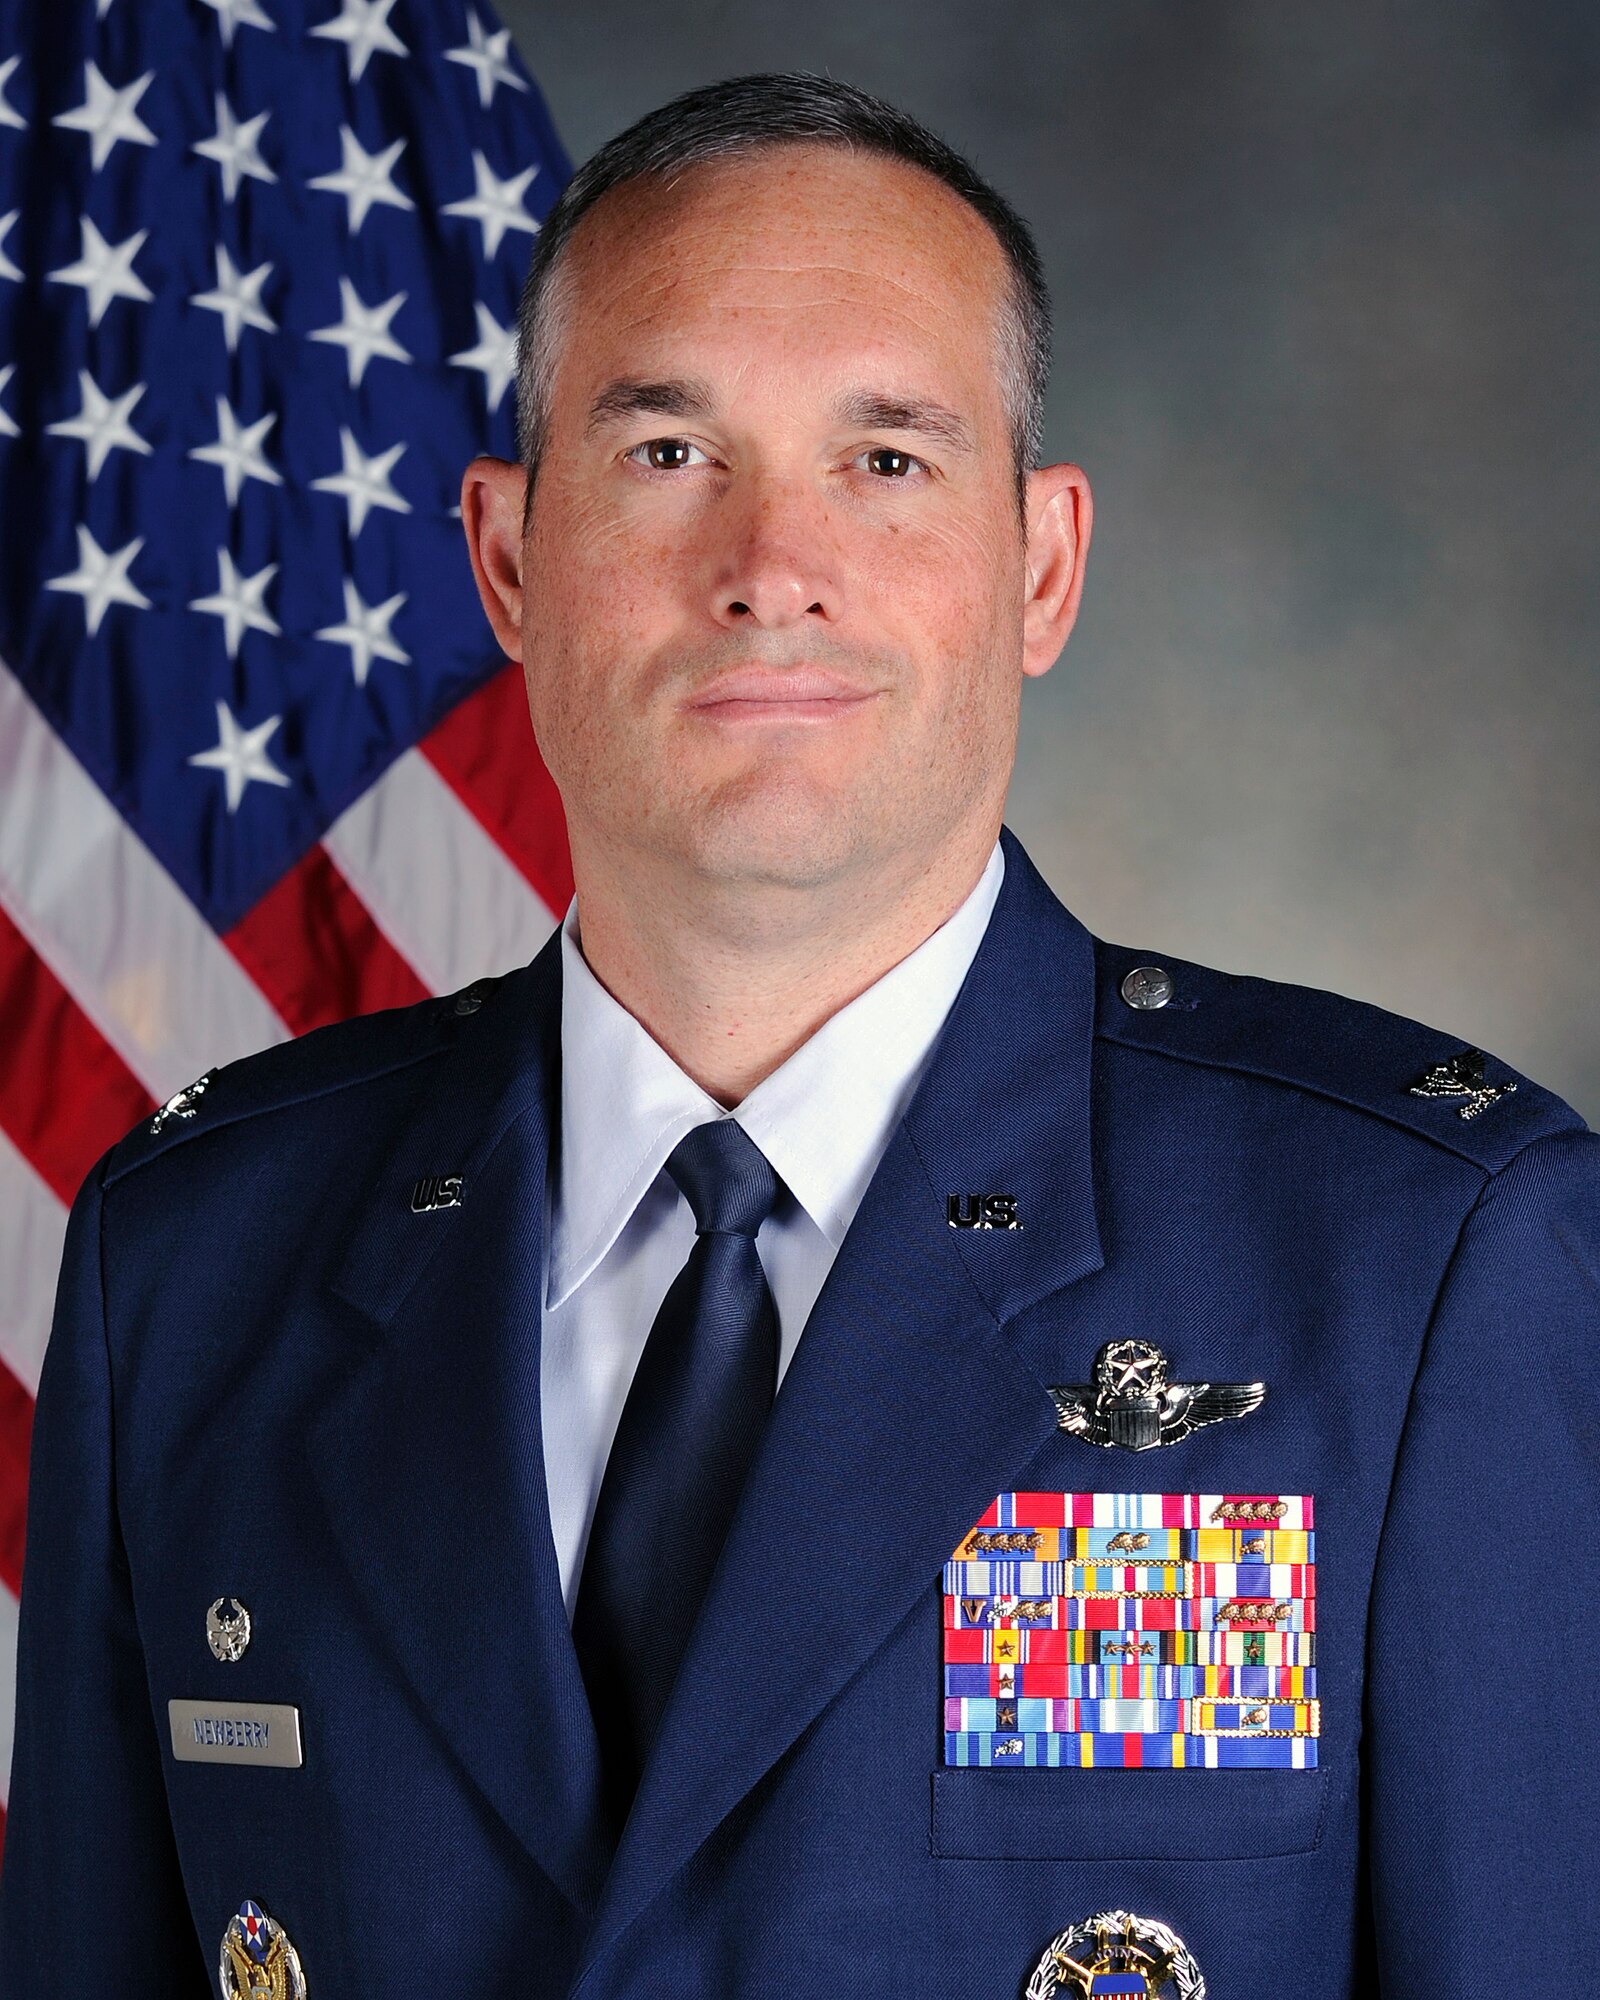 Col. Brian Newberry is the 92nd Air Refueling Wing commander at Fairchild Air Force Base, Washington. (U.S. Air Force photo)